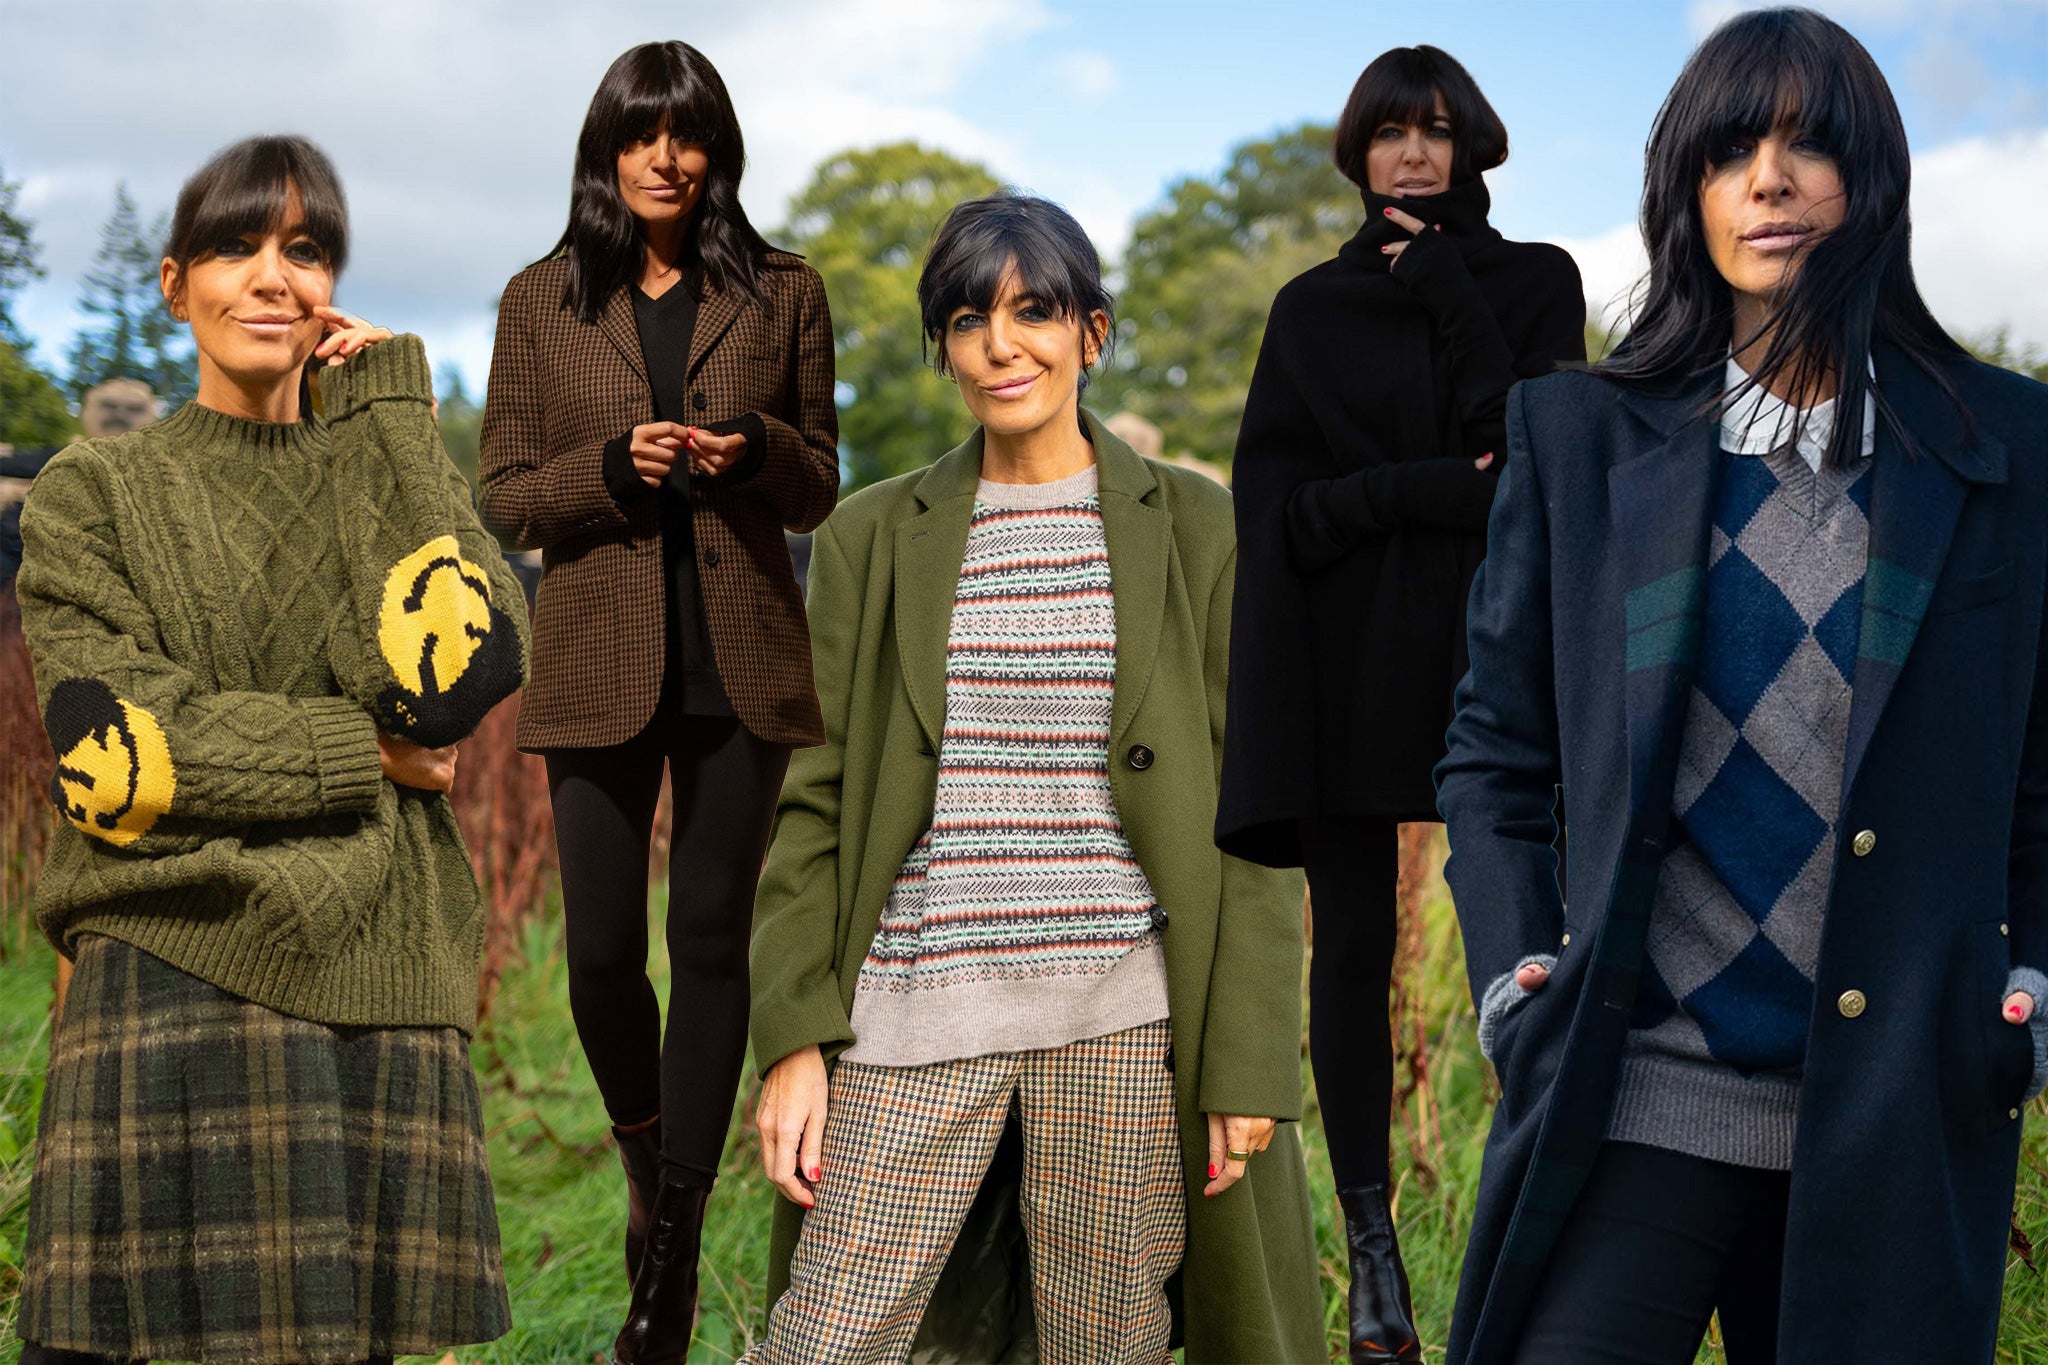 Winkleman’s ‘Traitors’ style is countryside chic with a twist